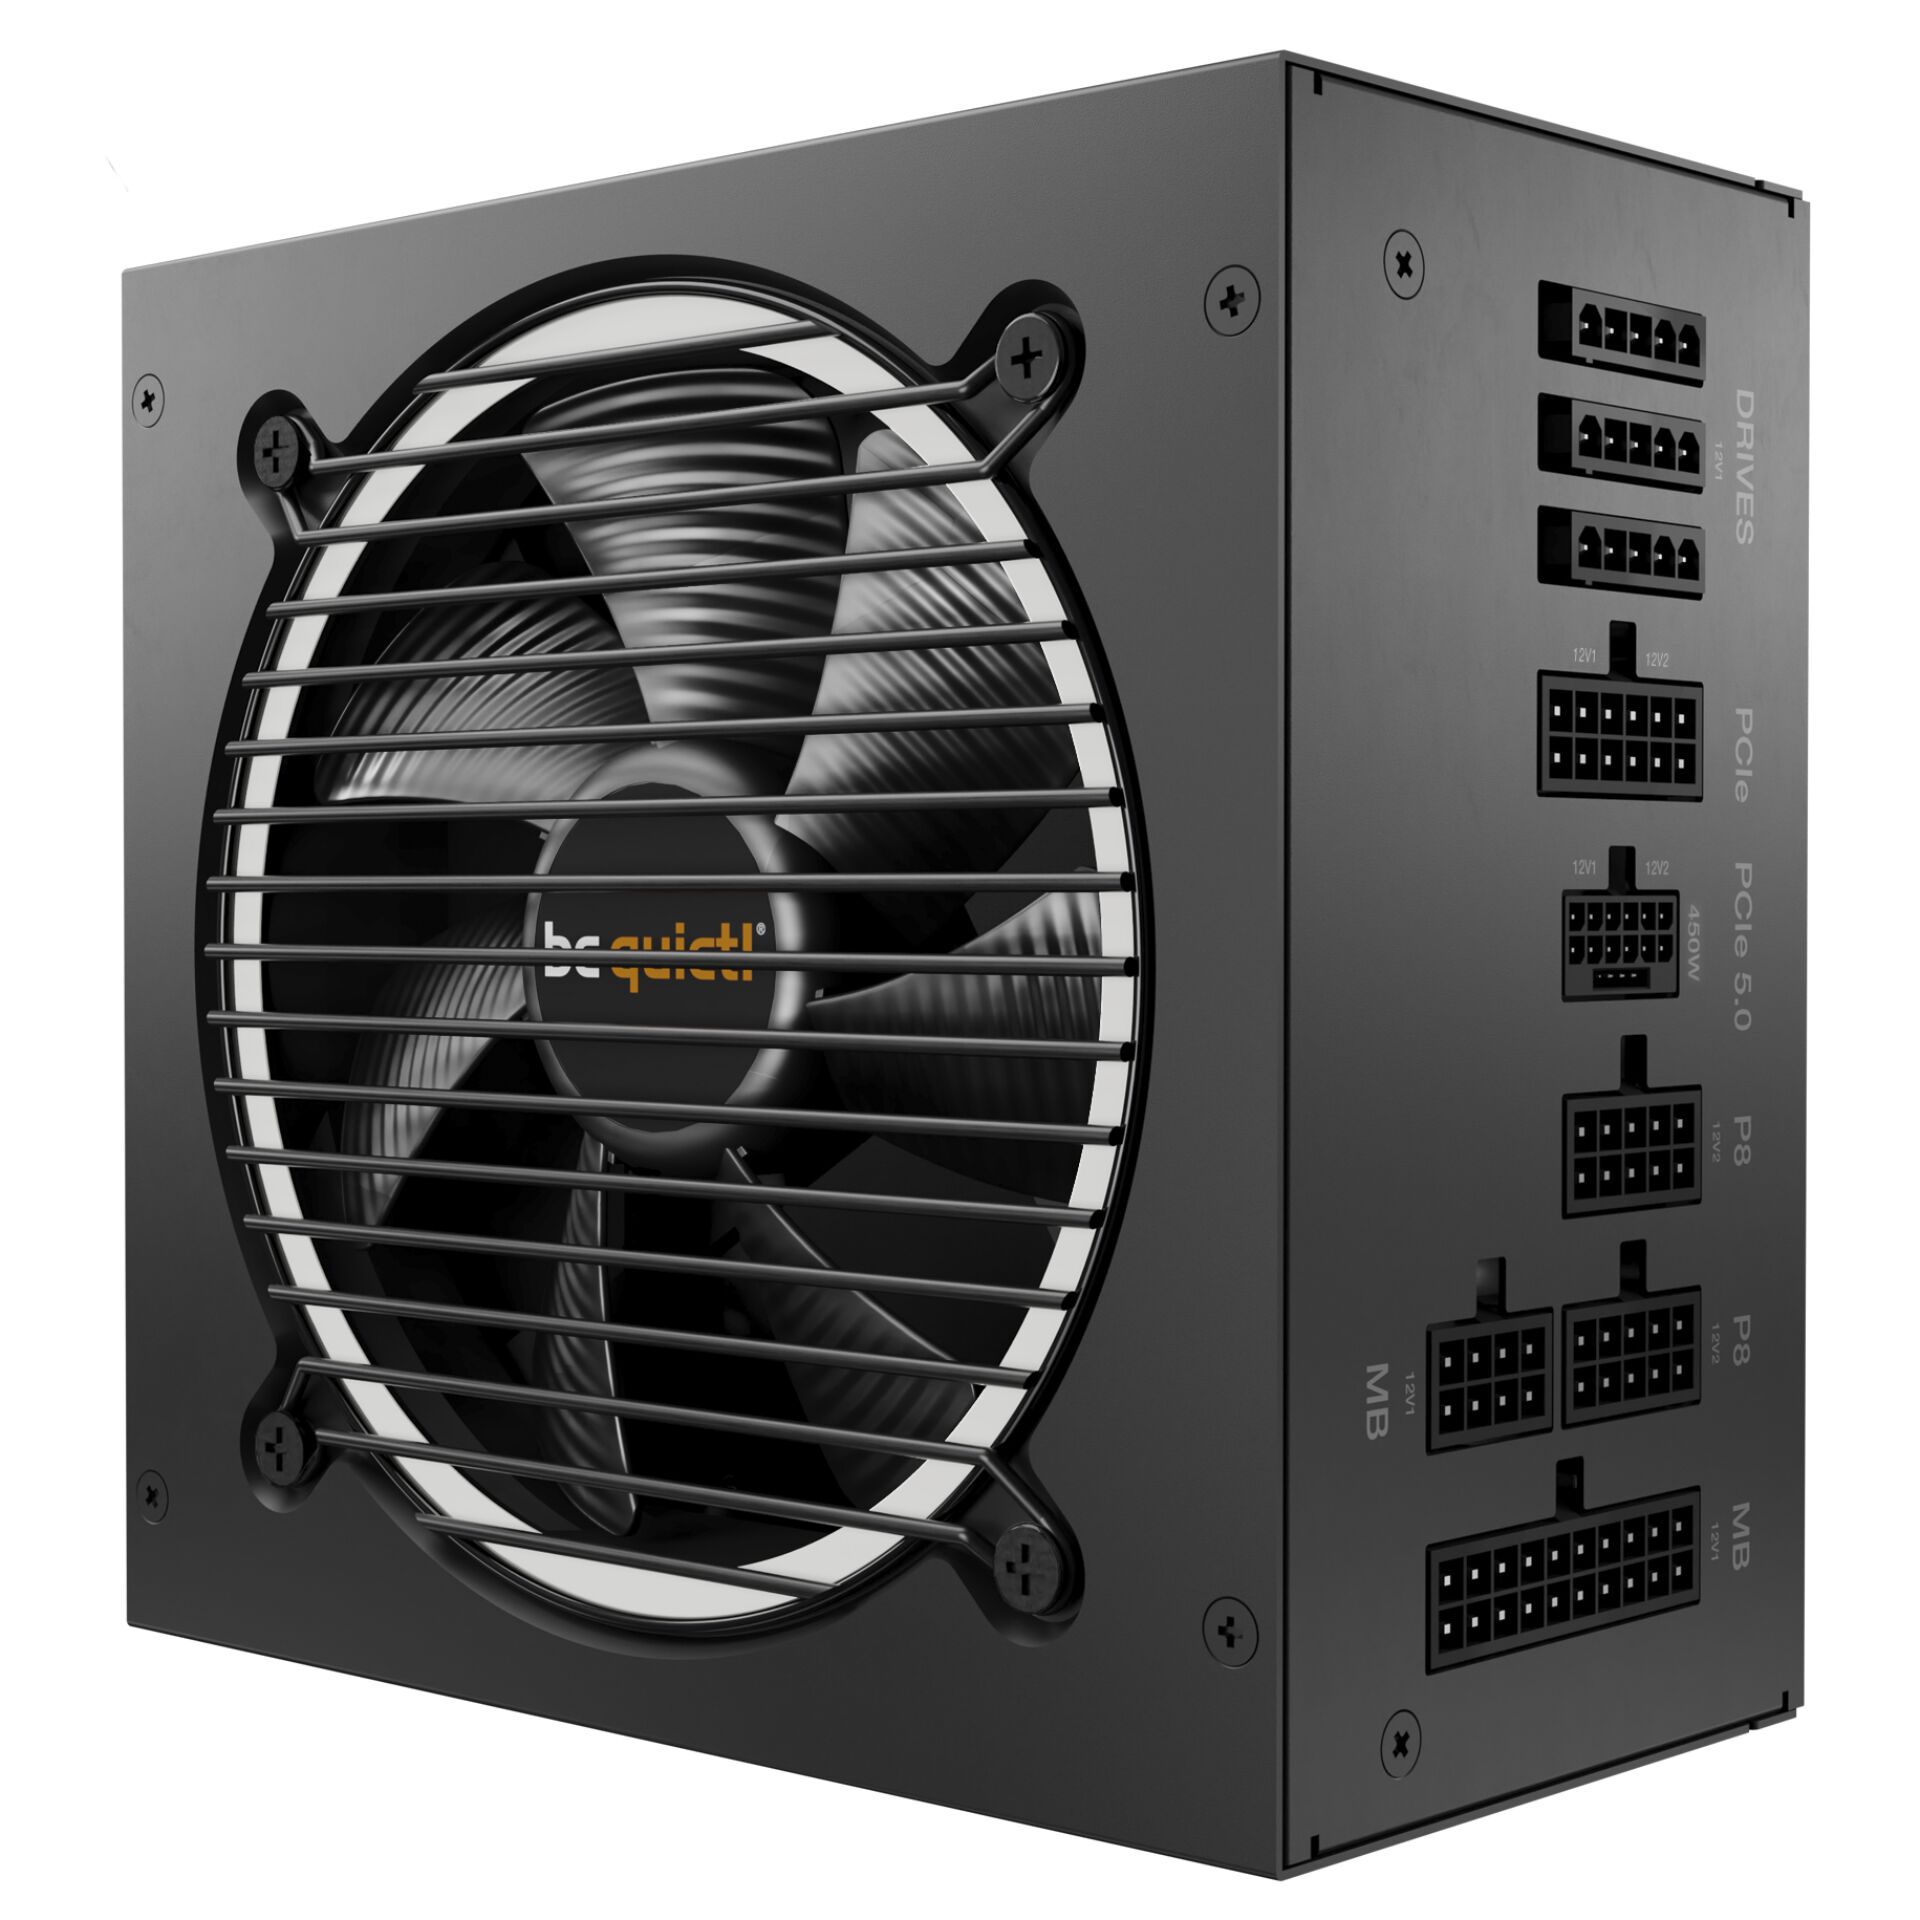 be quiet Pure Power 12 M 650W